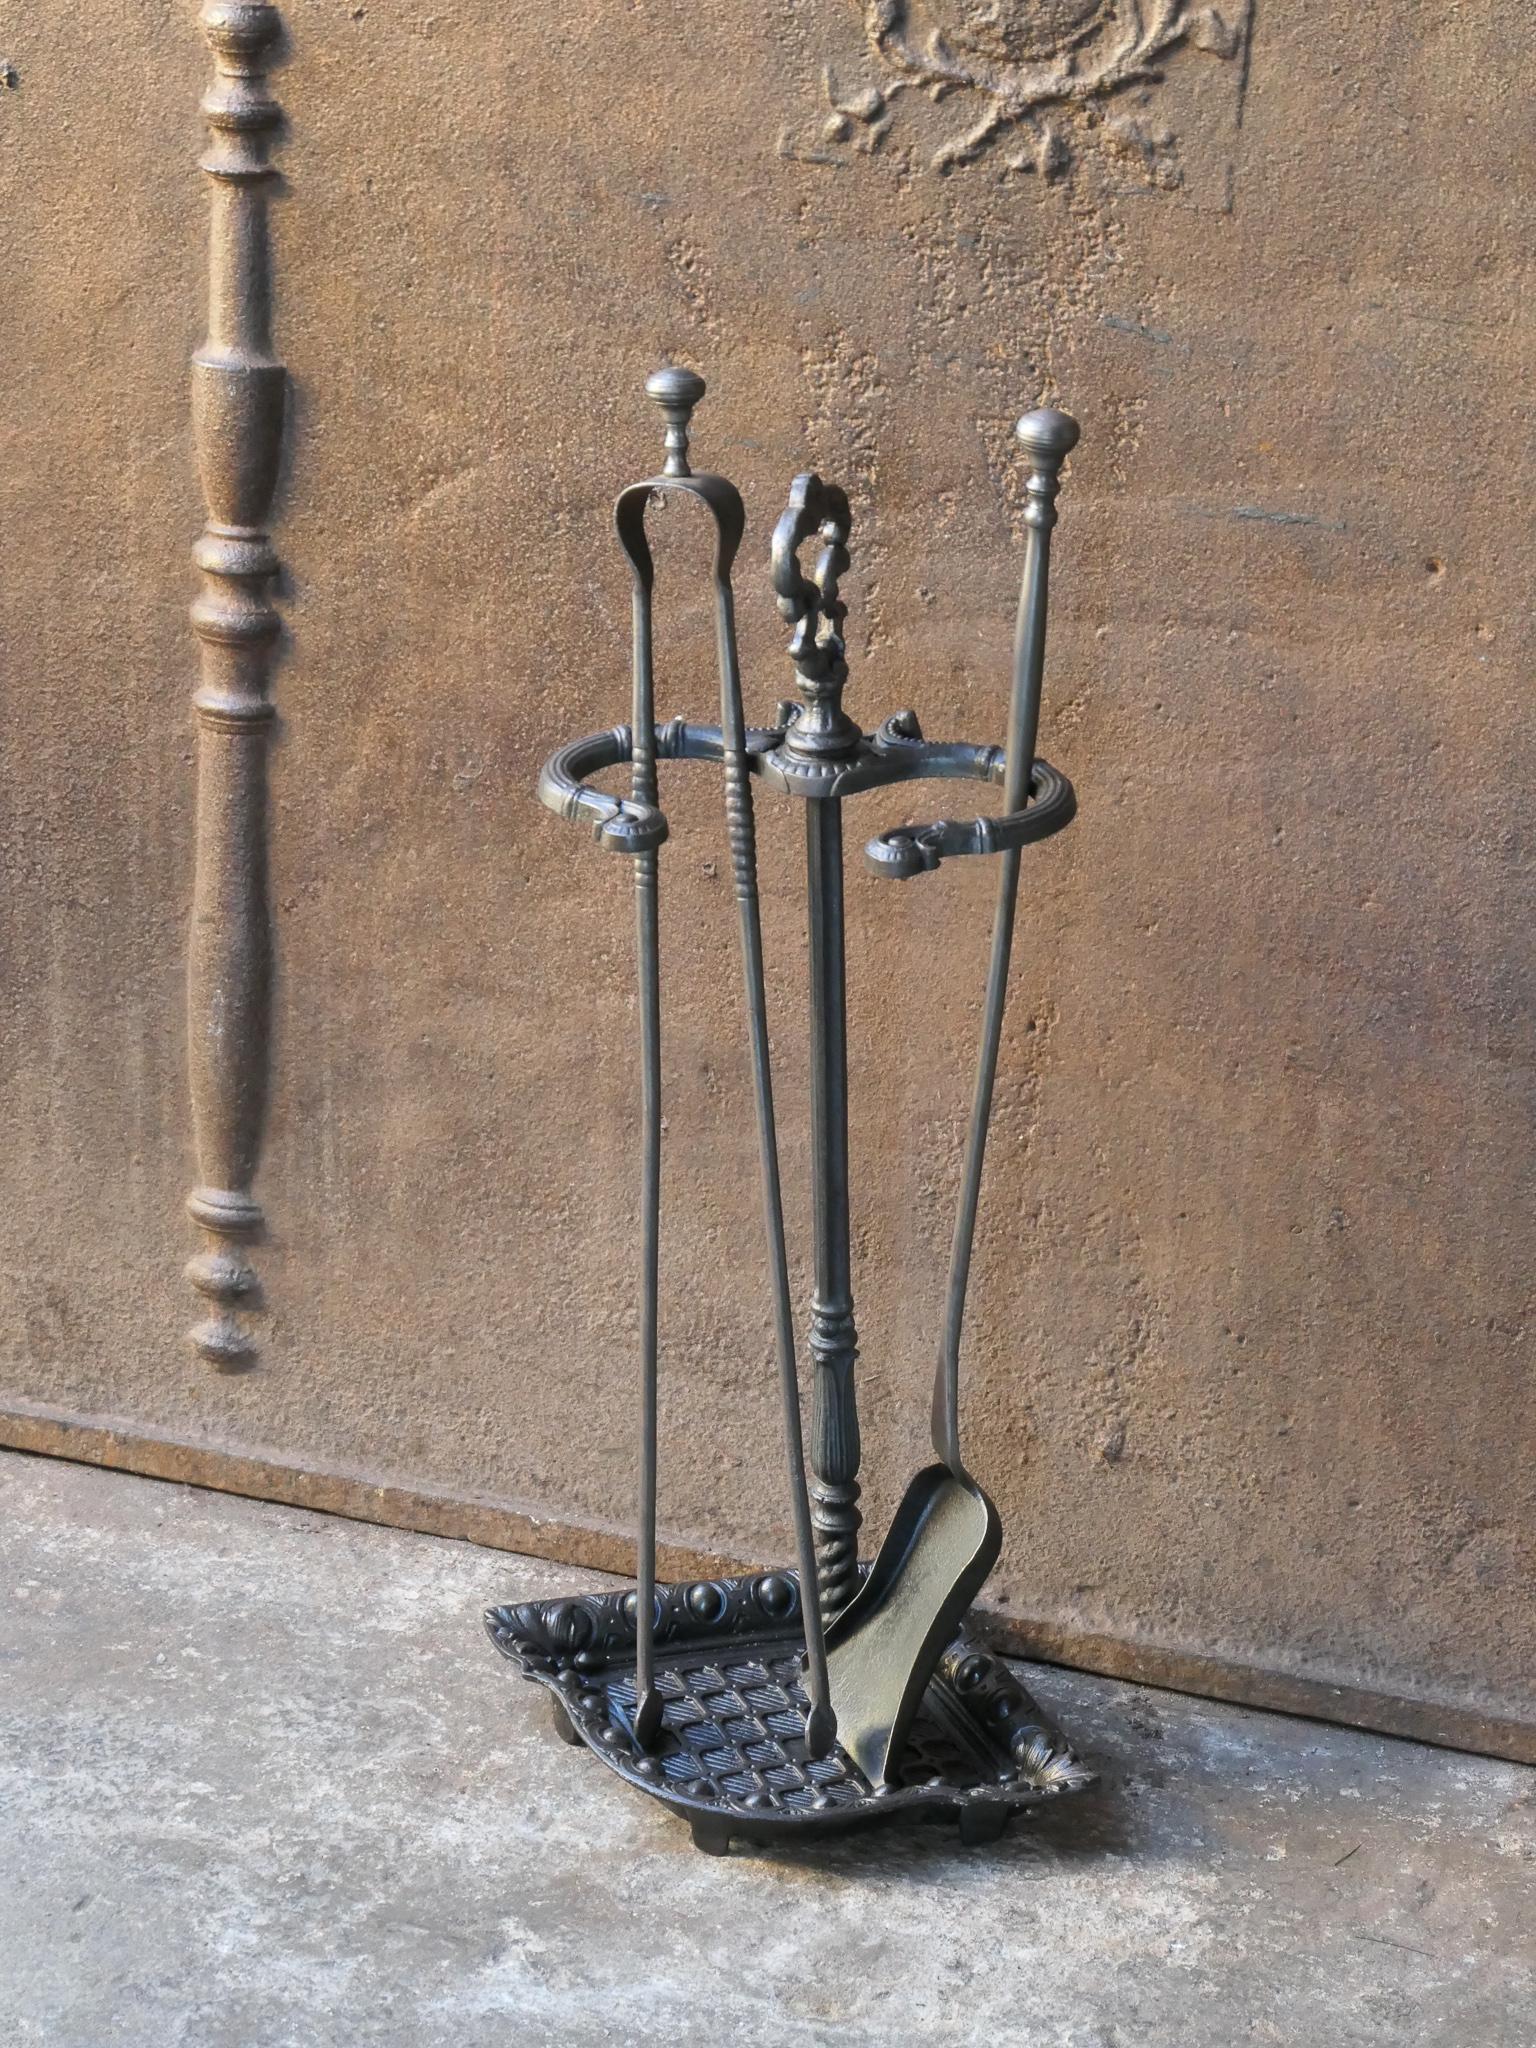 19th century French Napoleon III fireplace tool set. The tool set consists of thongs, shovel and stand. Made of cast iron and wrought iron. It is in a good condition and is fully functional.